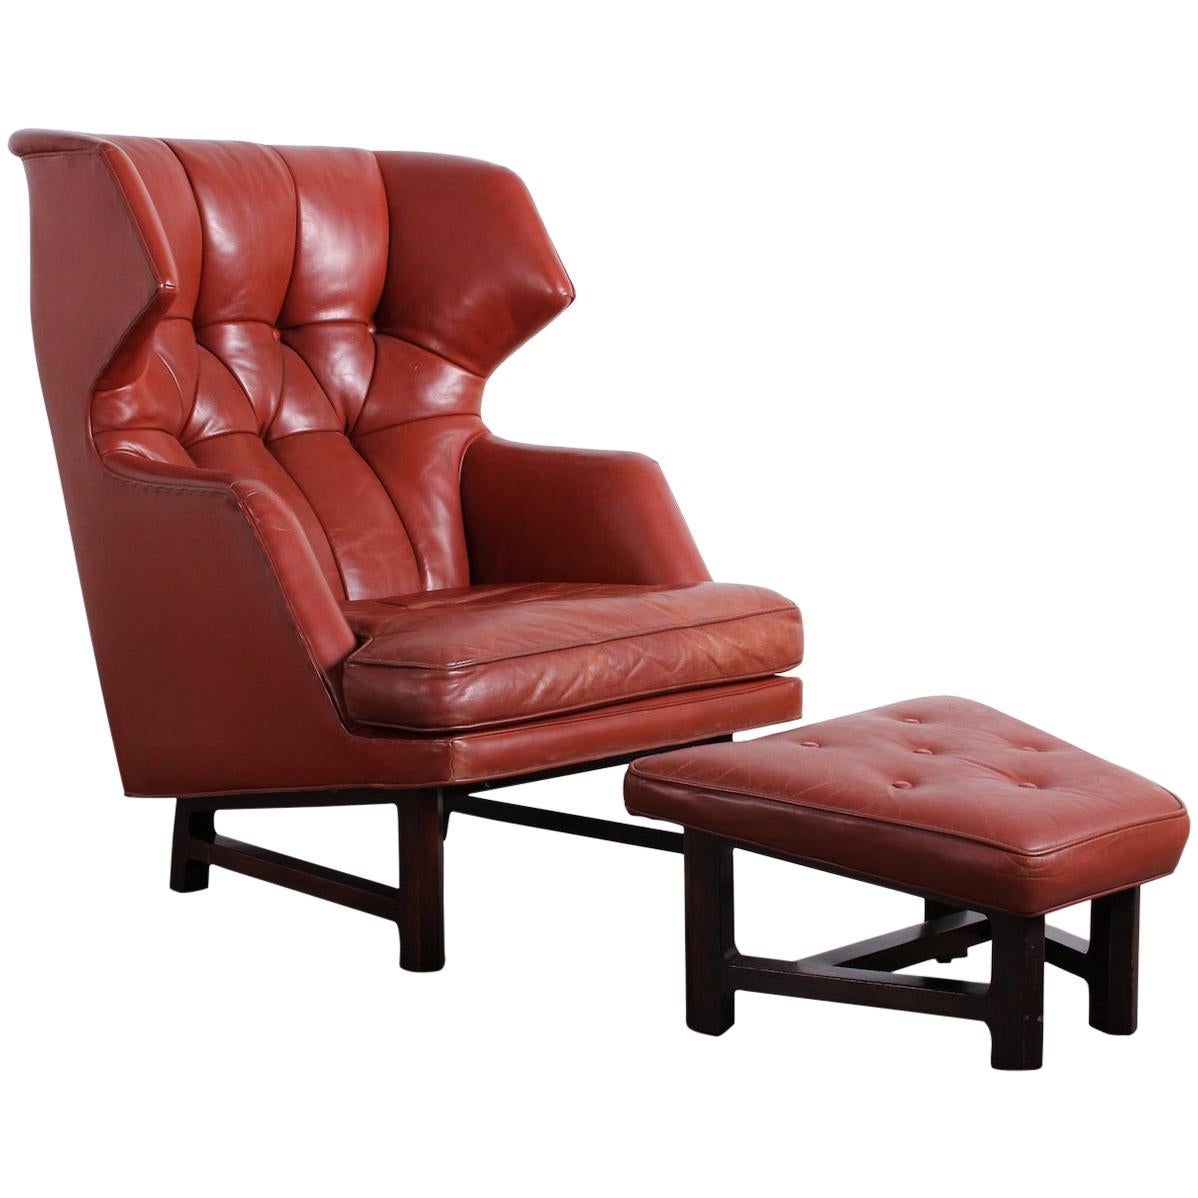 Janus Wing Chair and Ottoman by Edward Wormley for Dunbar in Original Leather